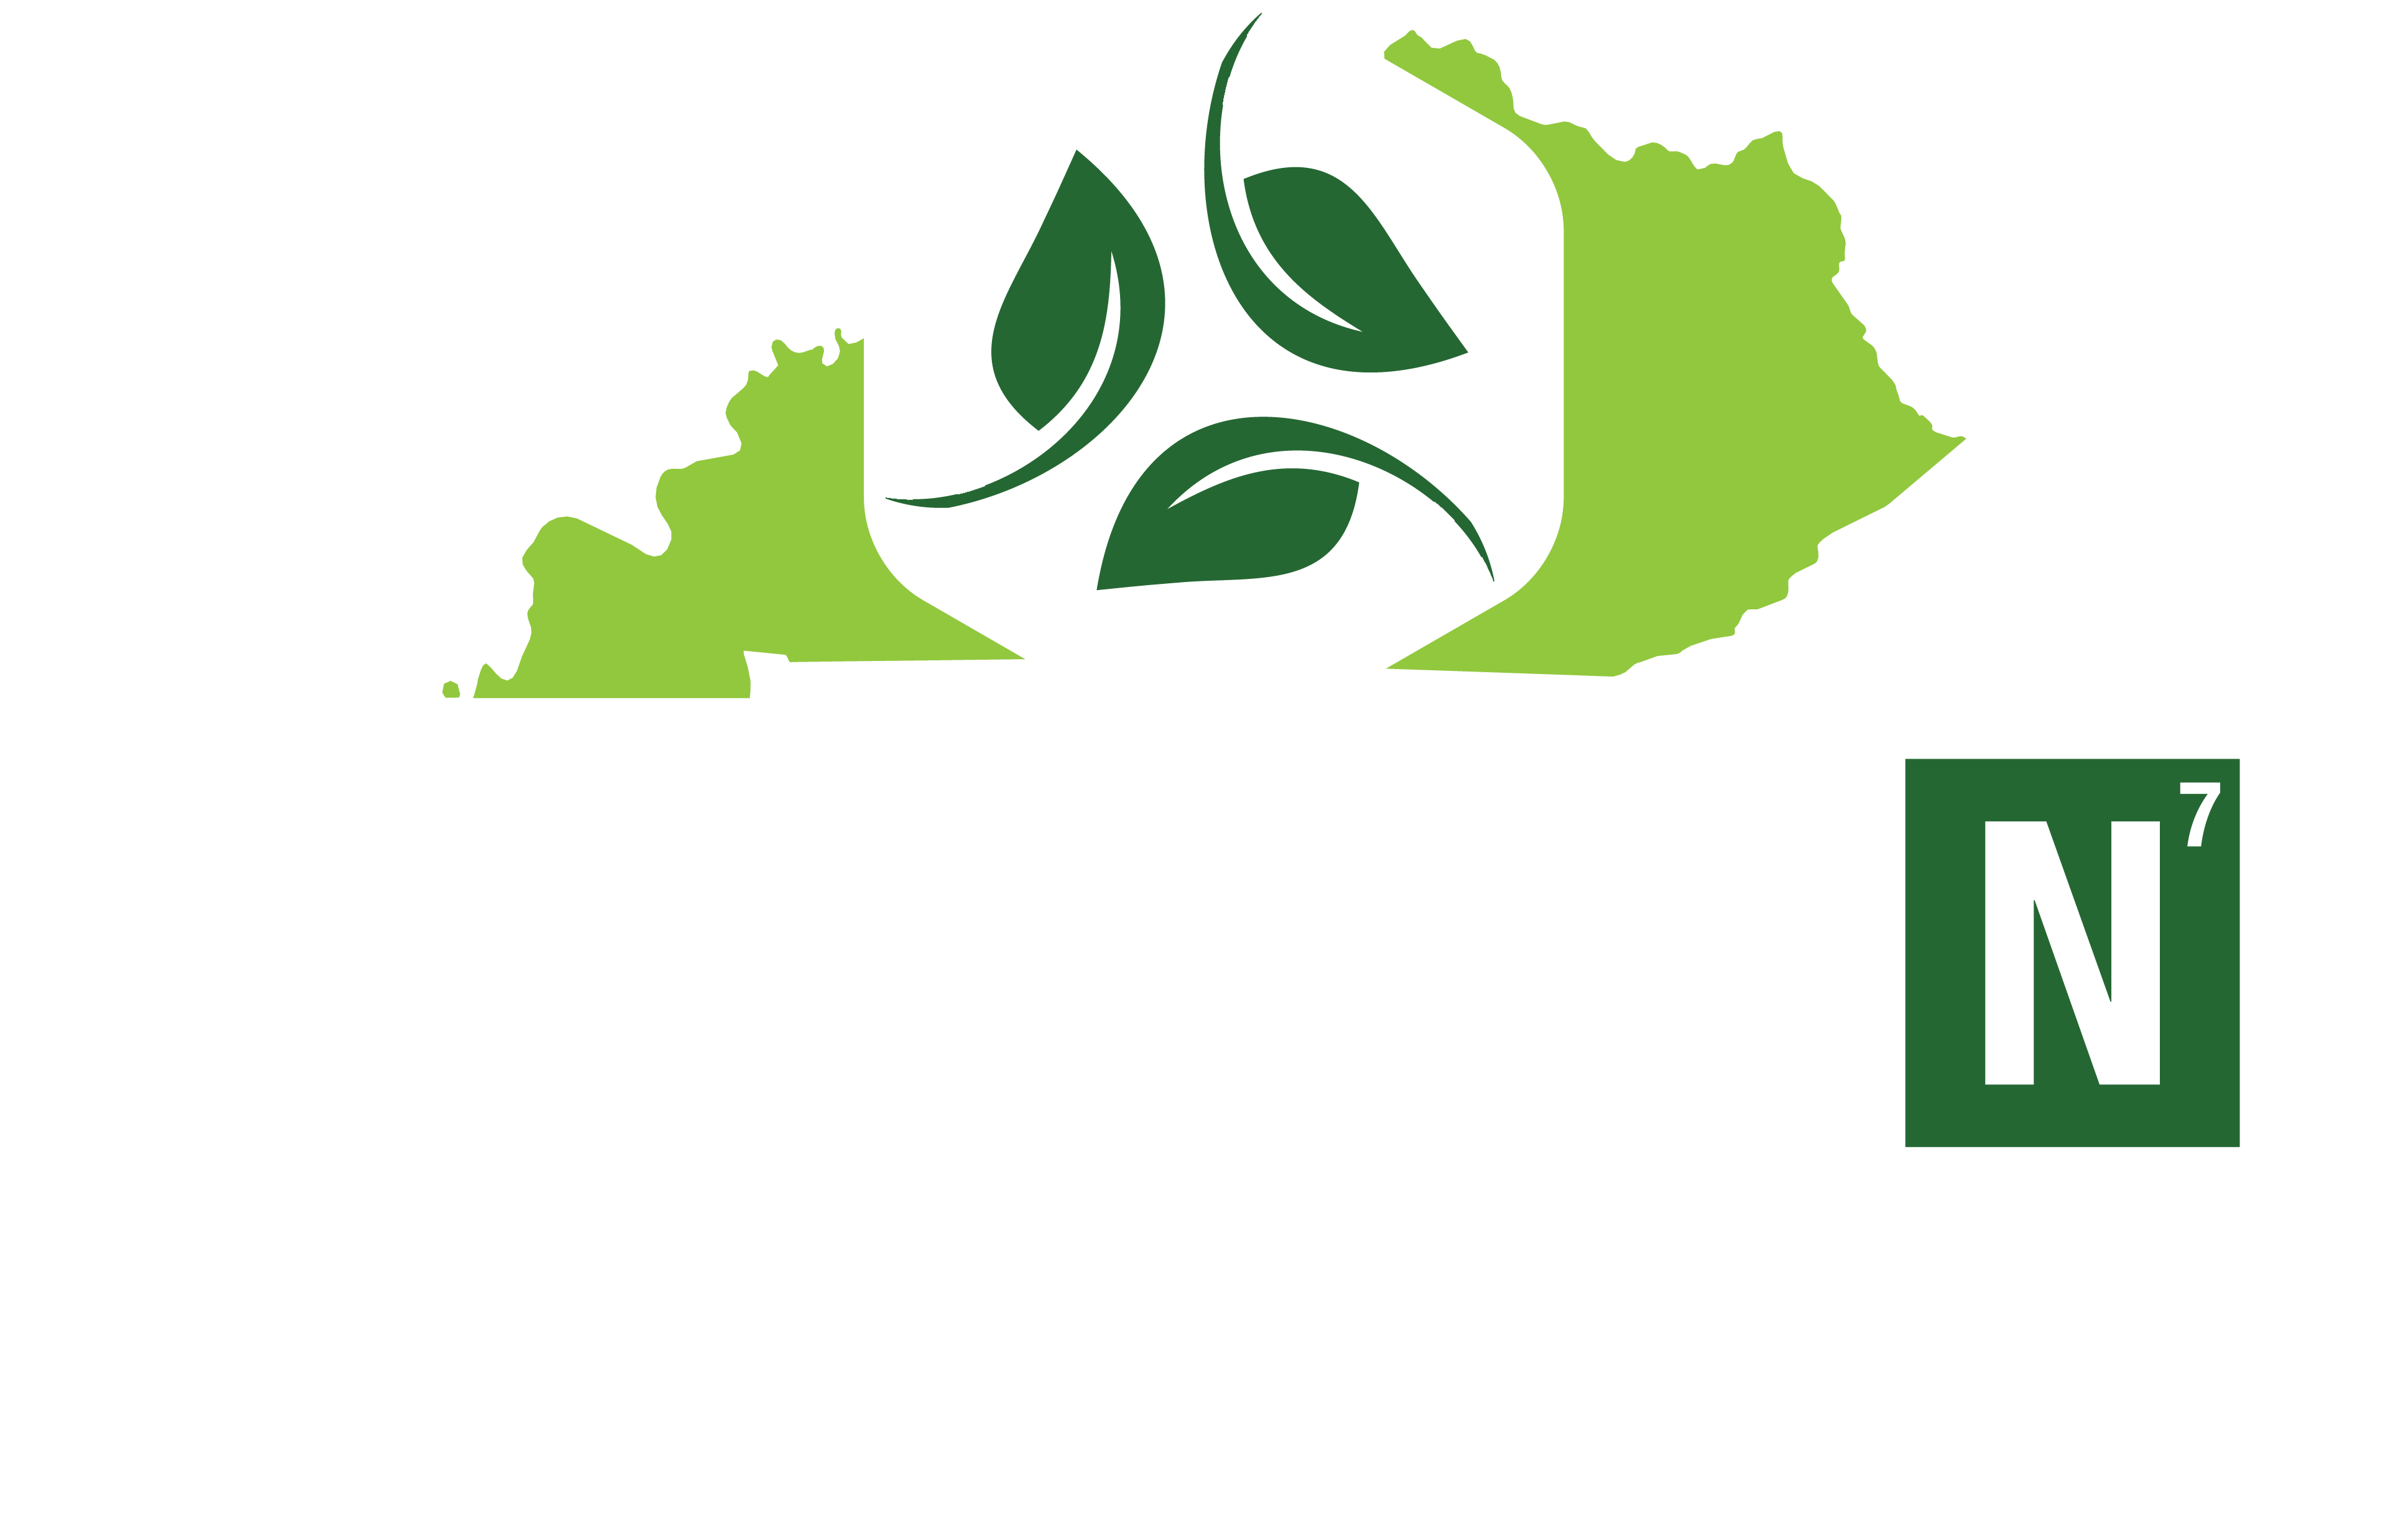 Imperial Lawns Logo - State Of Kentucky (4024x2551)